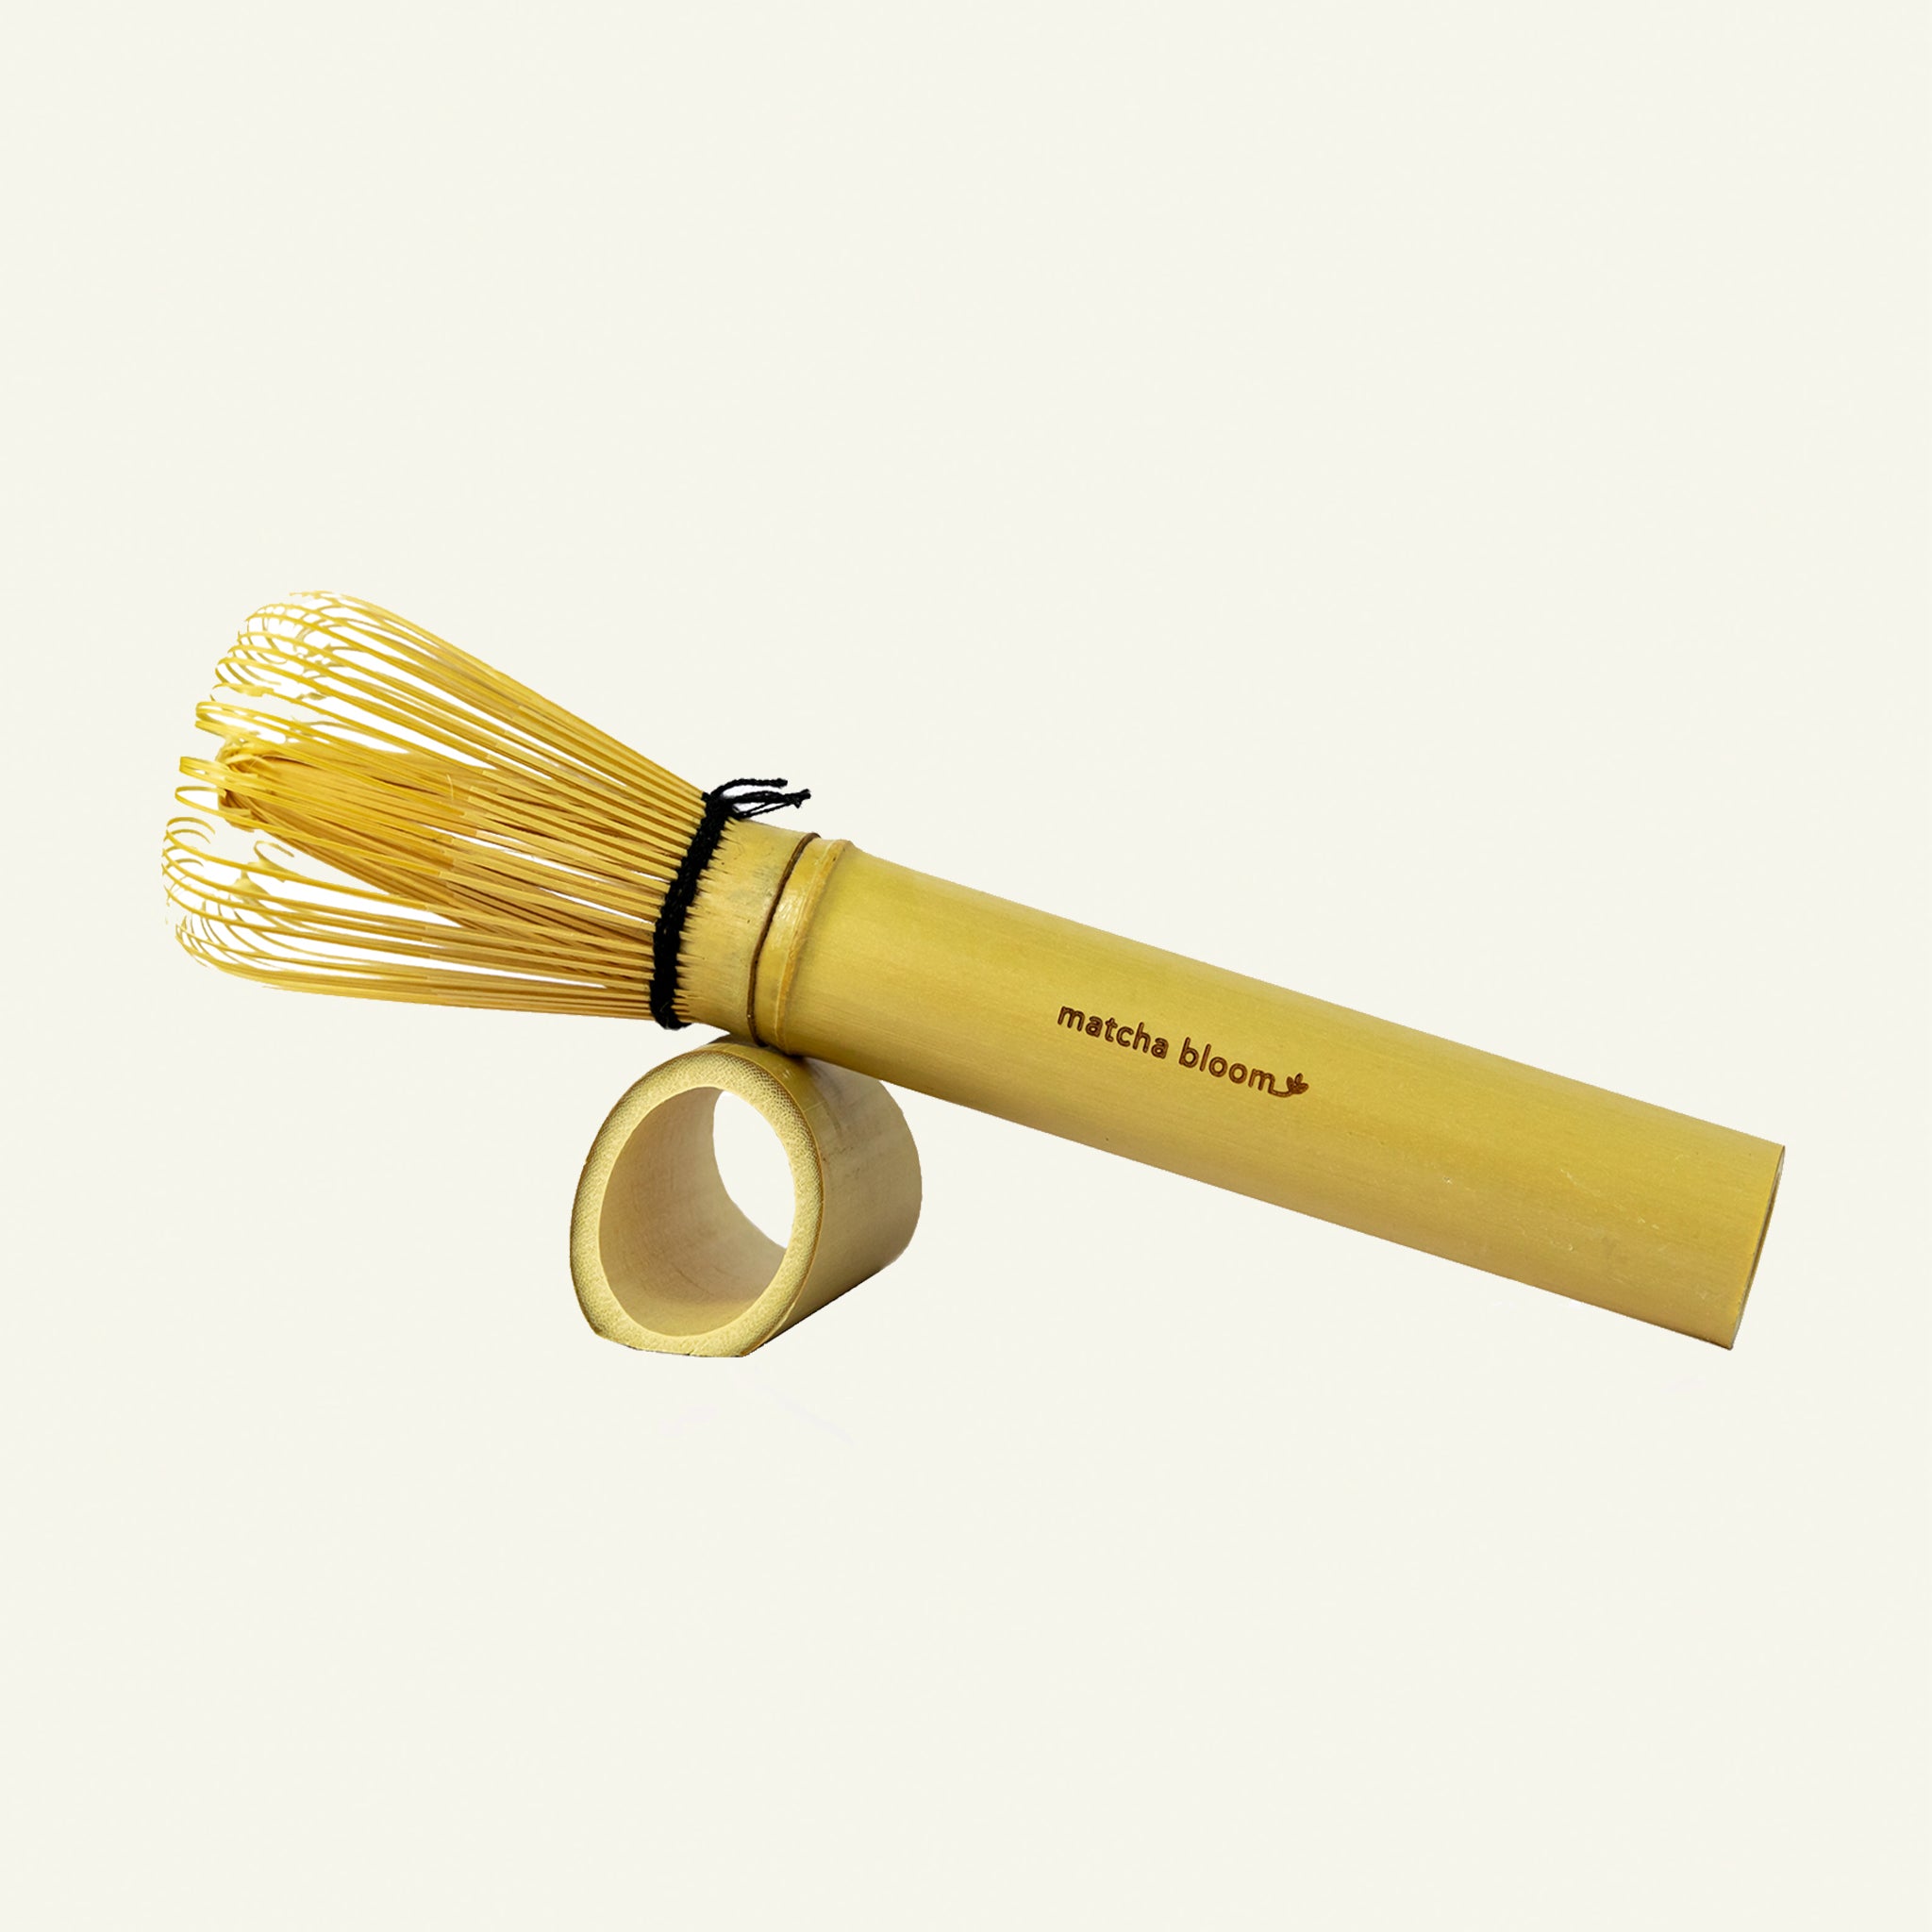 Bamboo Whisk - Traditional Ceremonial Matcha Whisk